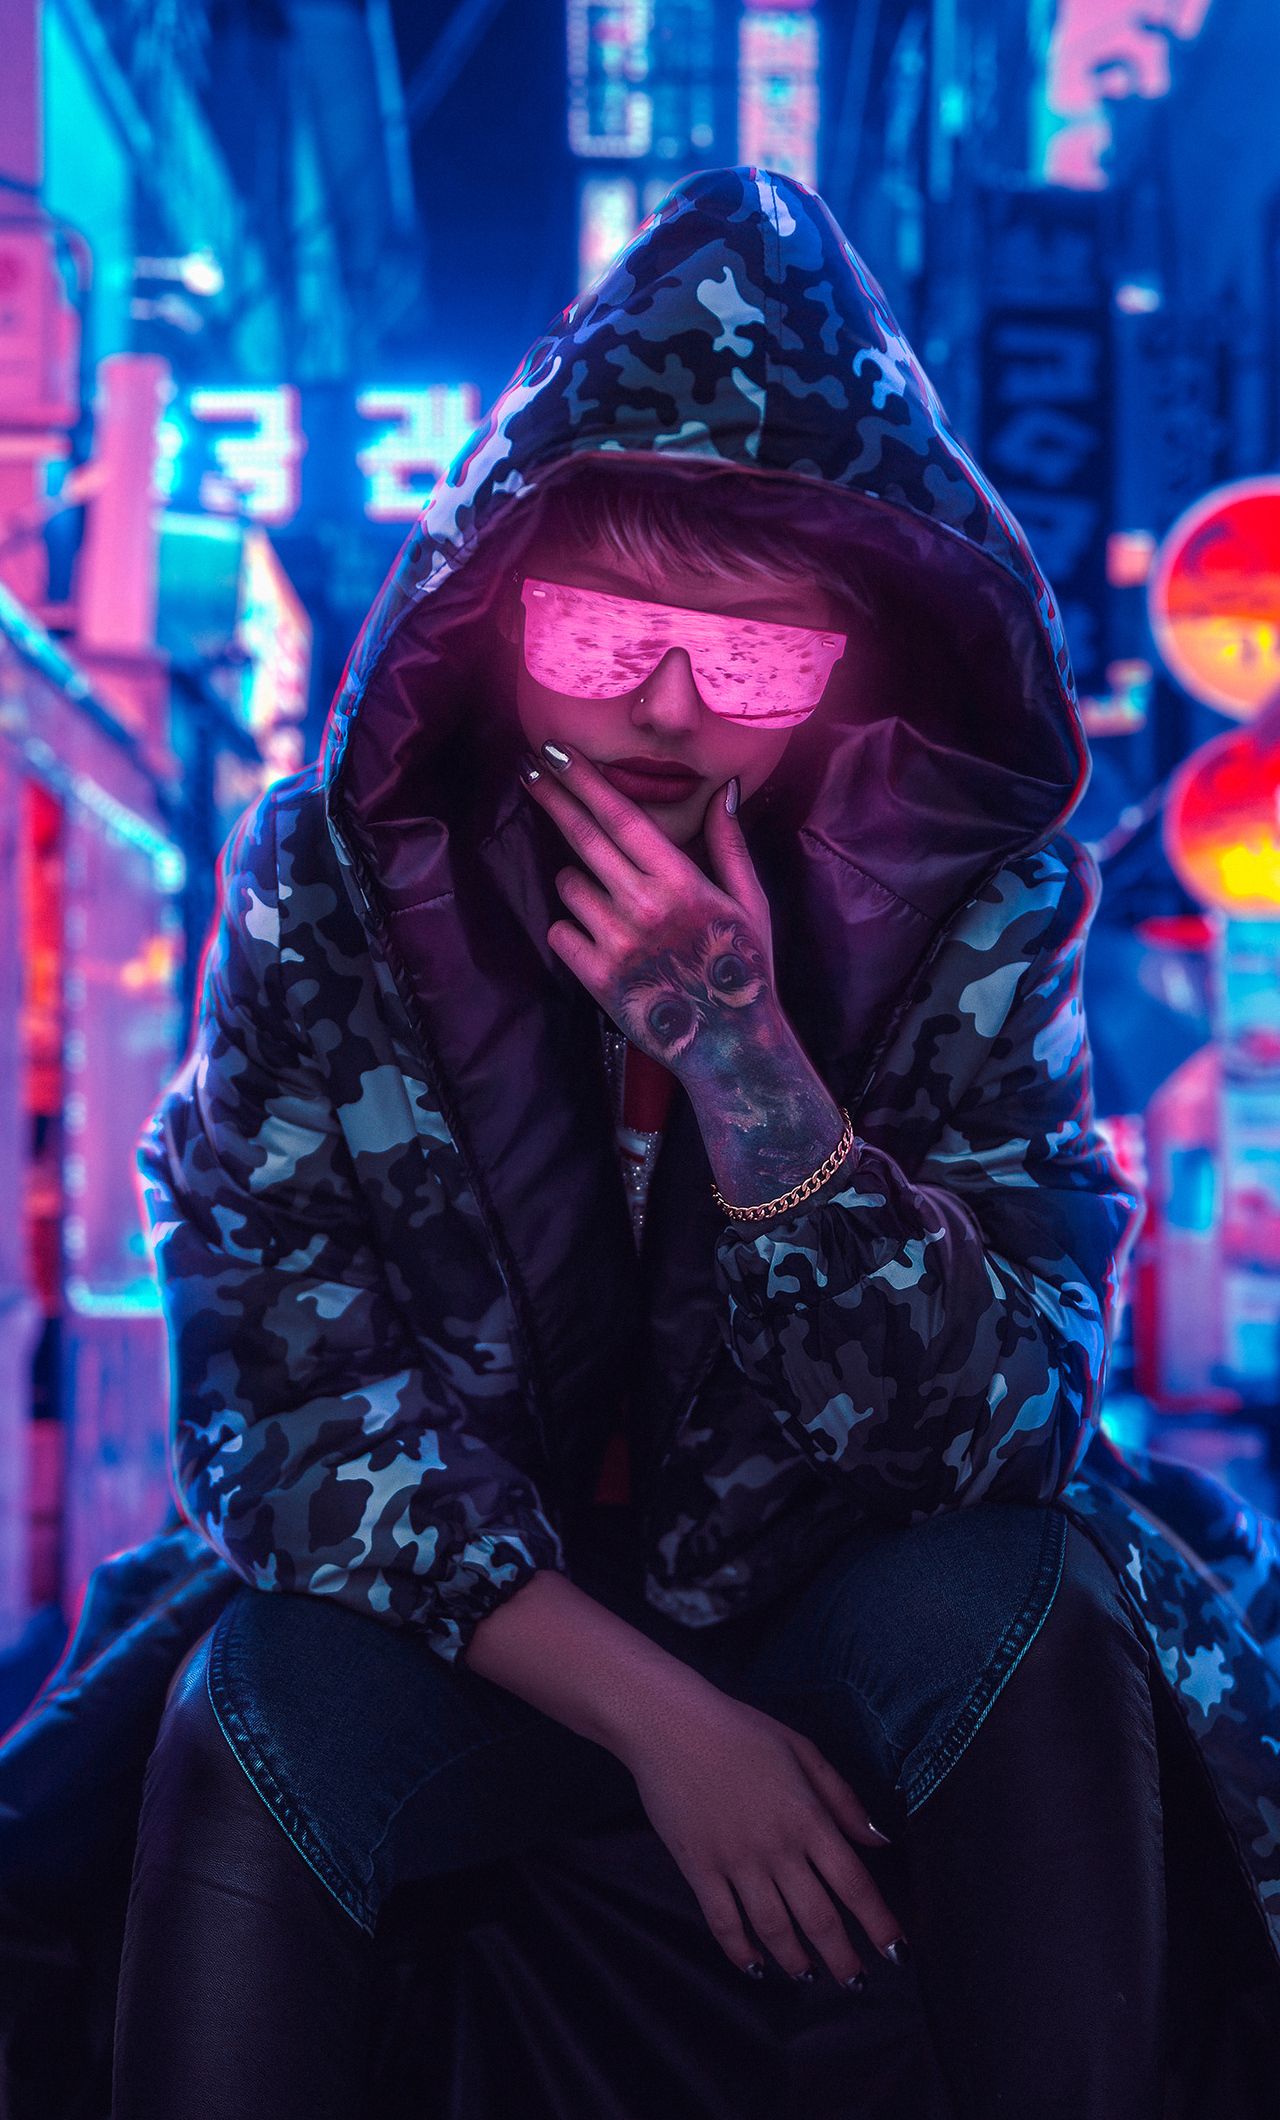 Neon Glasses Girl Wearing Hoodie iPhone HD 4k Wallpaper, Image, Background, Photo and Picture